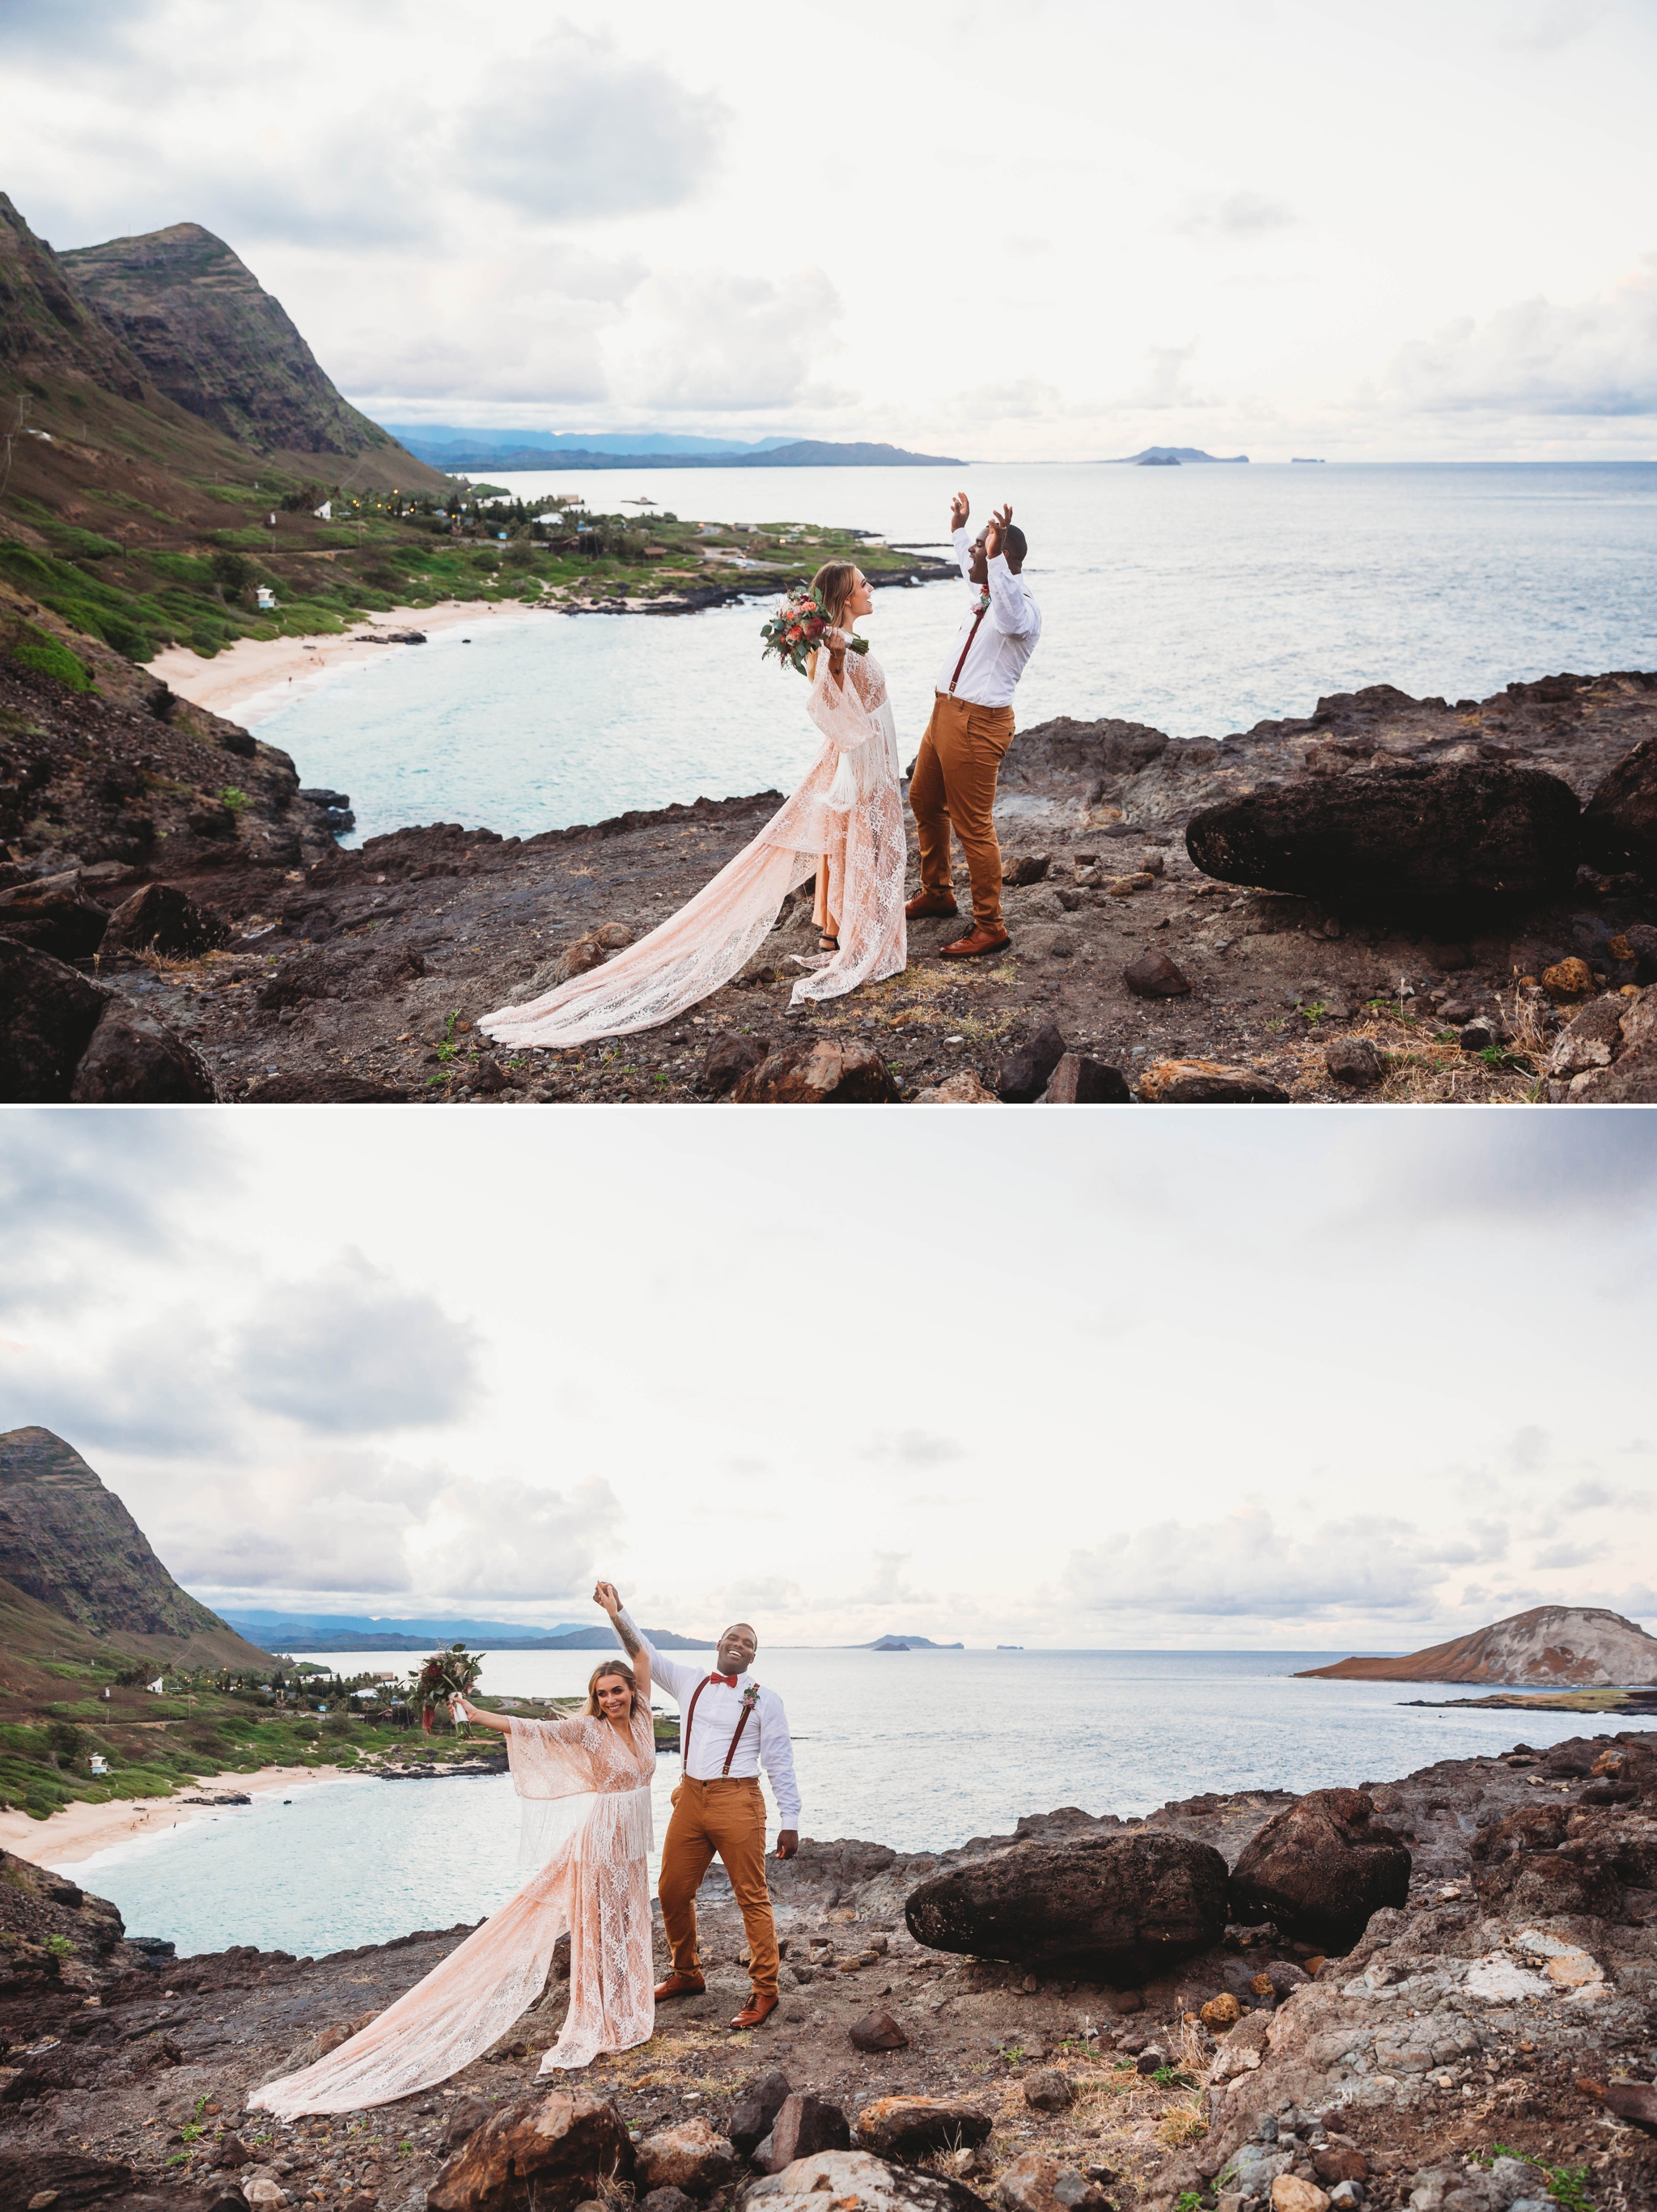  couple cheering after they got married - wedding ceremony at Makapuu Lookout overlooking the ocean and beach, Waimanalo, HI - Oahu Hawaii Engagement Photographer - Bride in a flowy fringe boho wedding dress - lanikai lookout - deutsche hochzeits fot